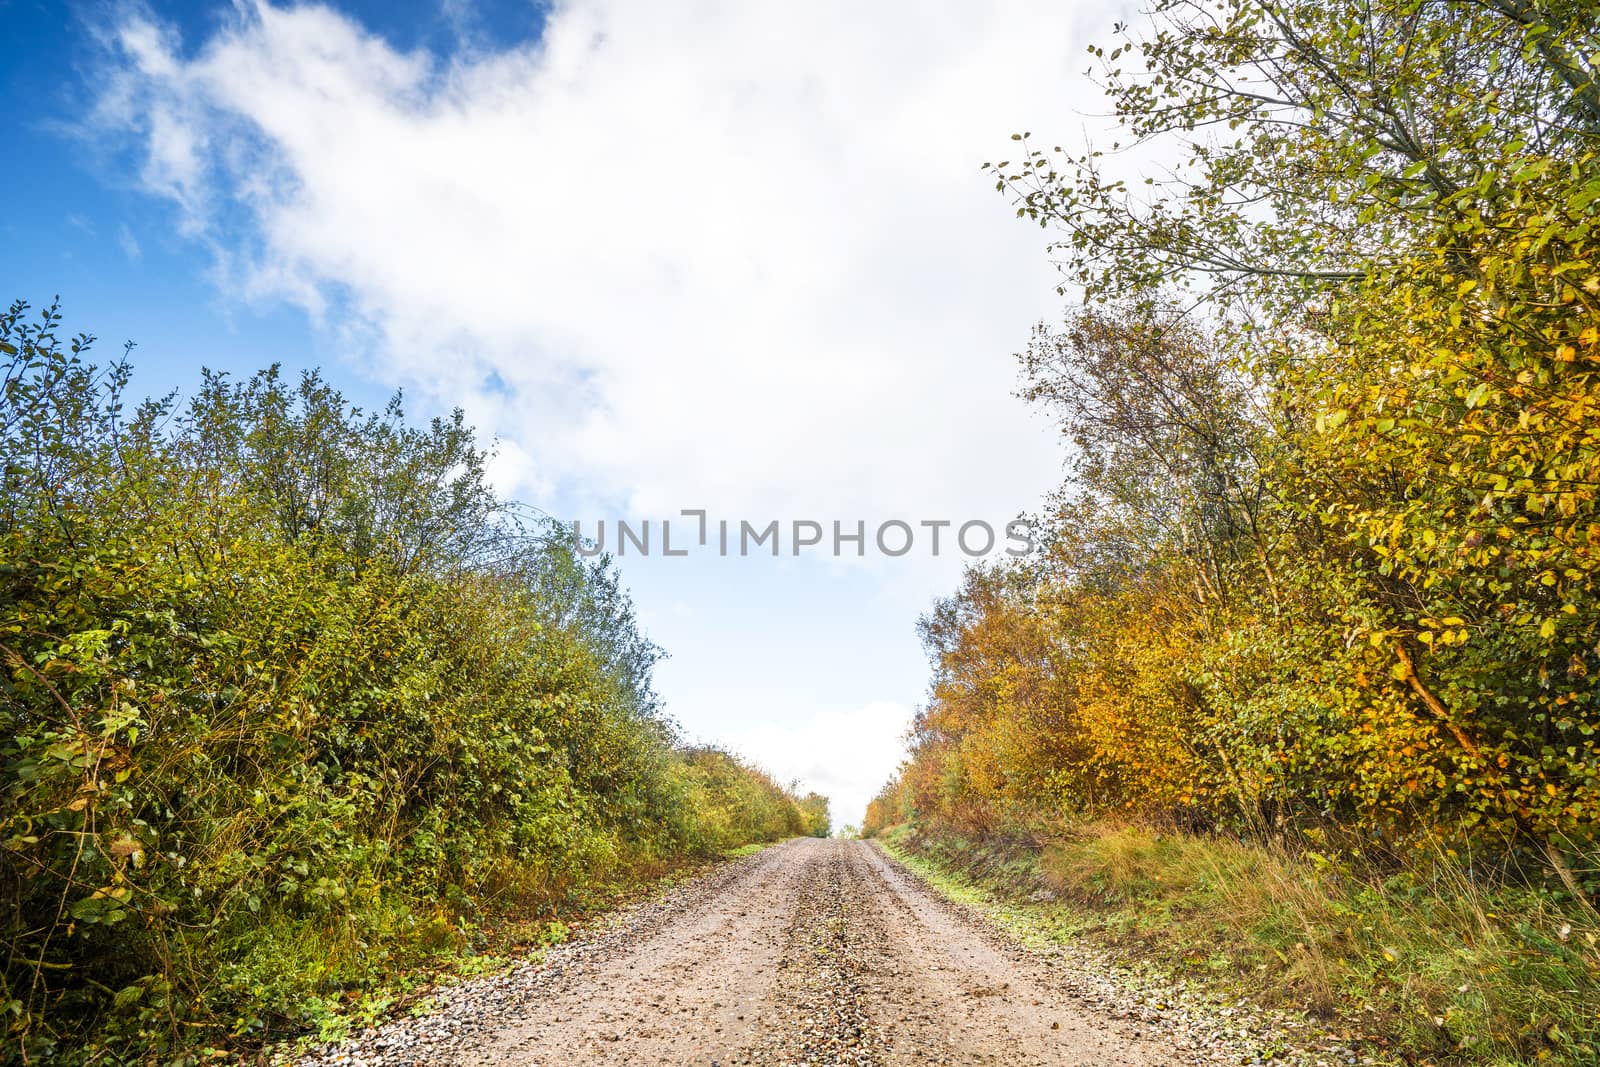 Autumn colors on trees by the roadside of a dirt trail by Sportactive